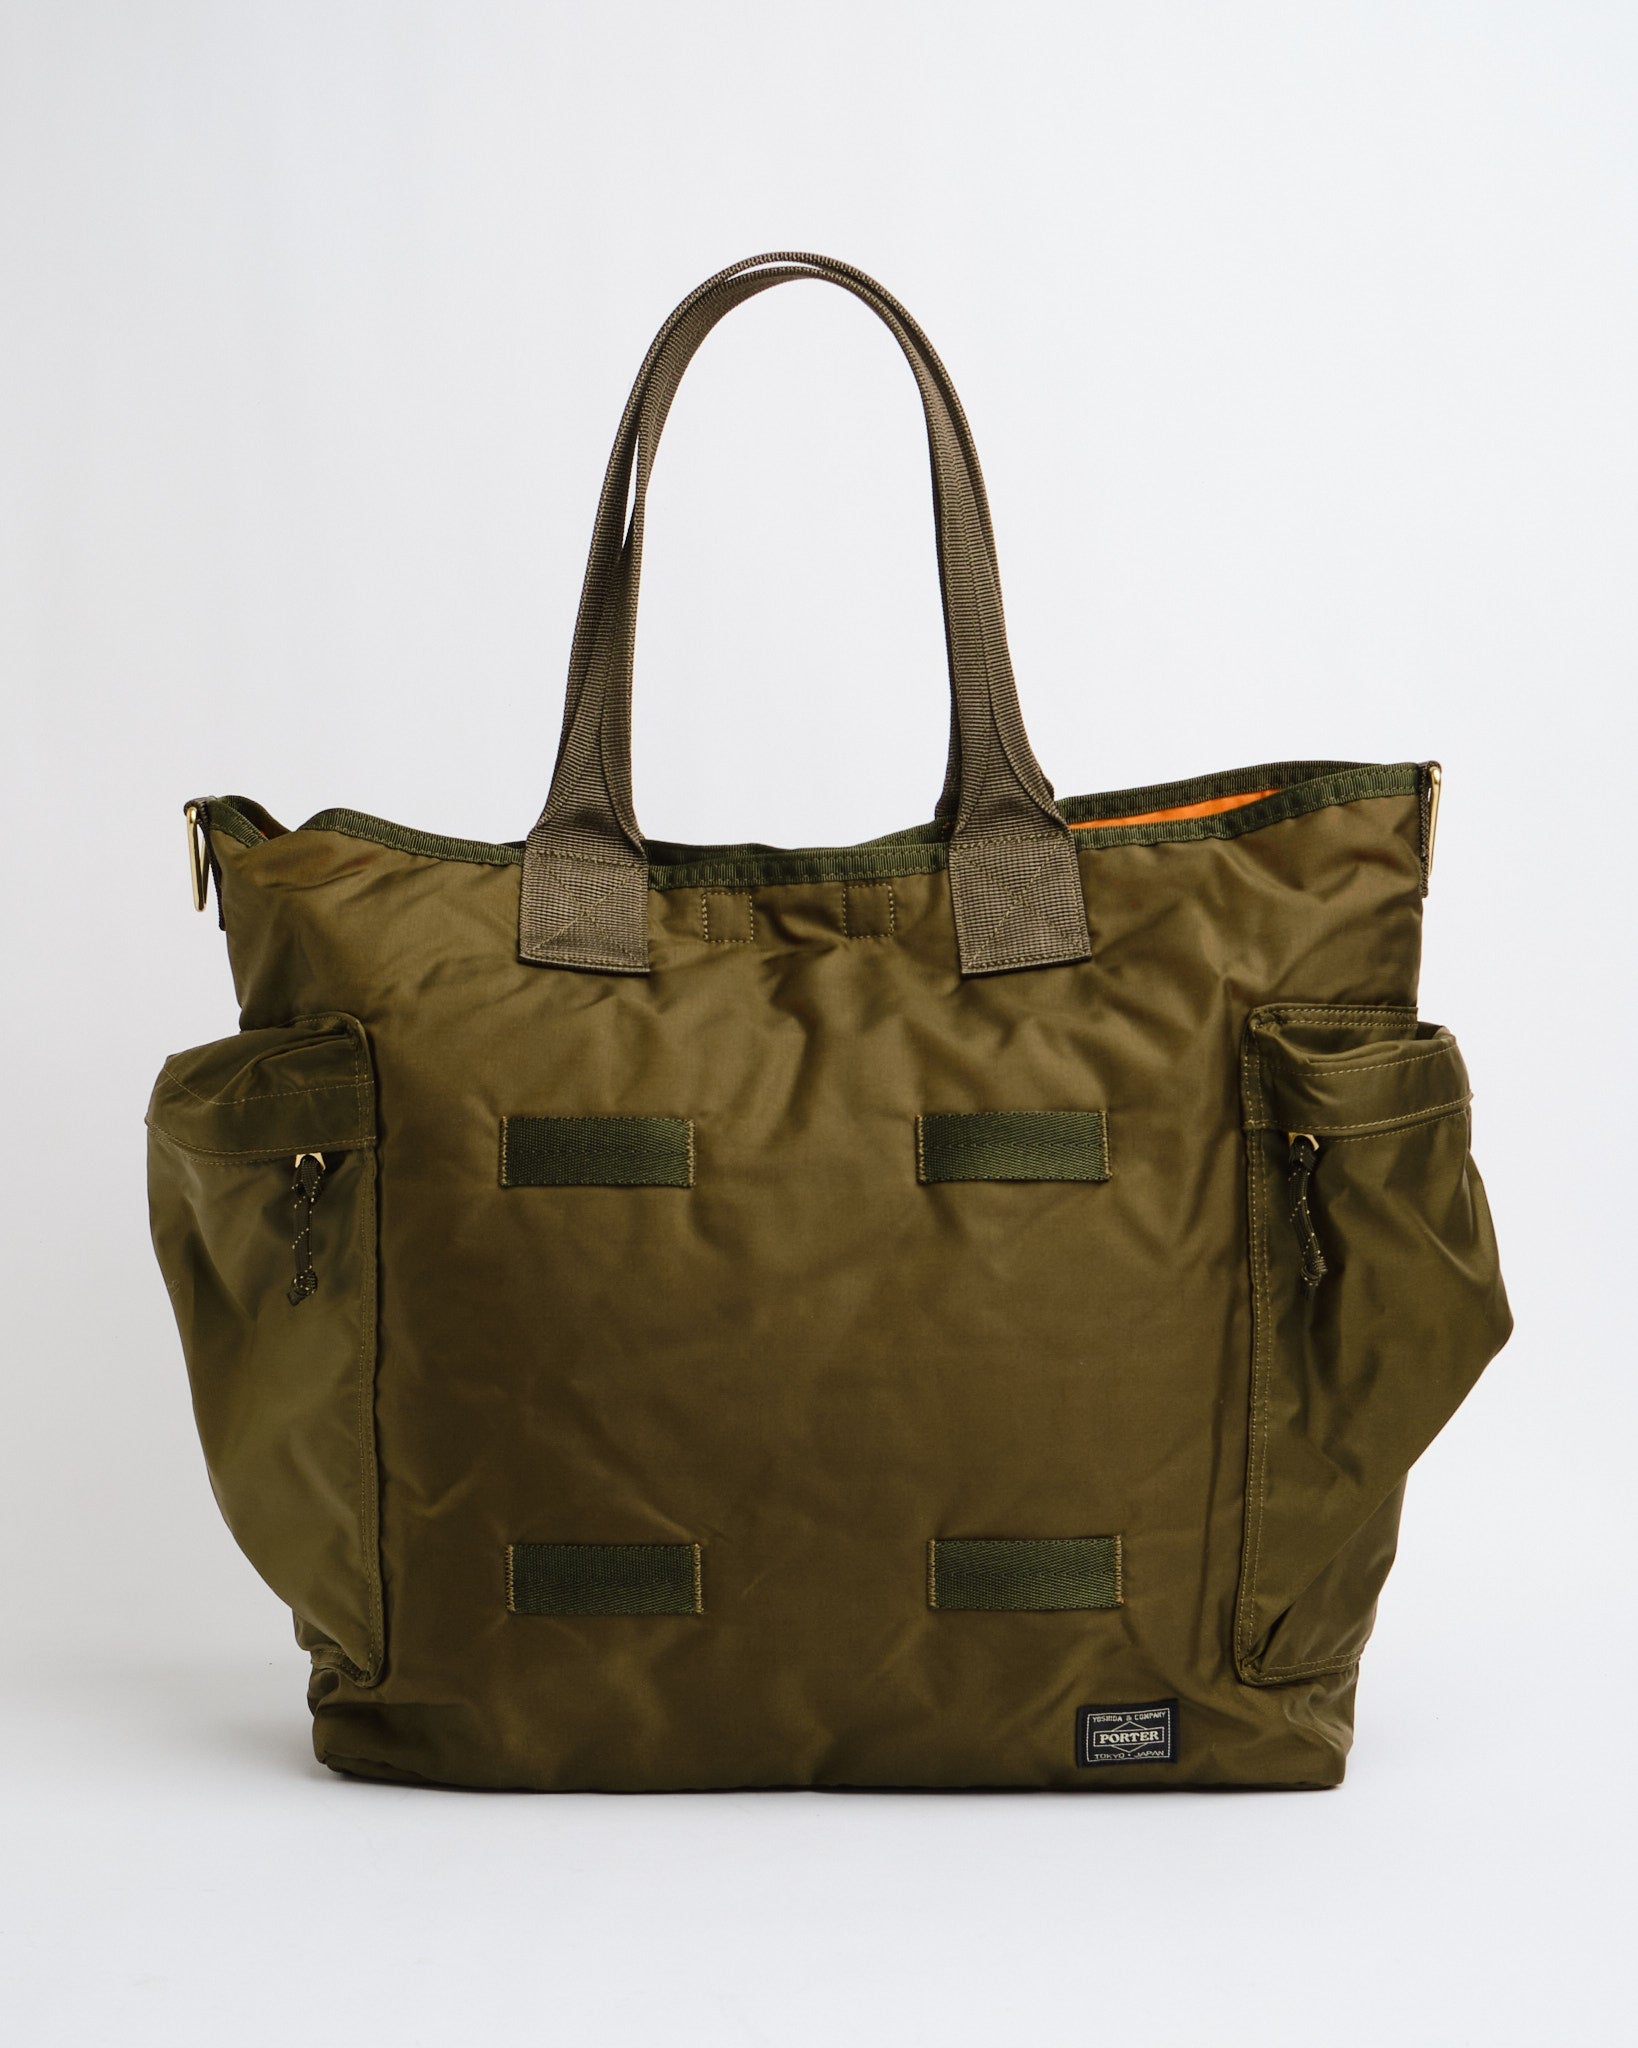 FORCE 2 WAY TOTE BAG OLIVE - Meadow